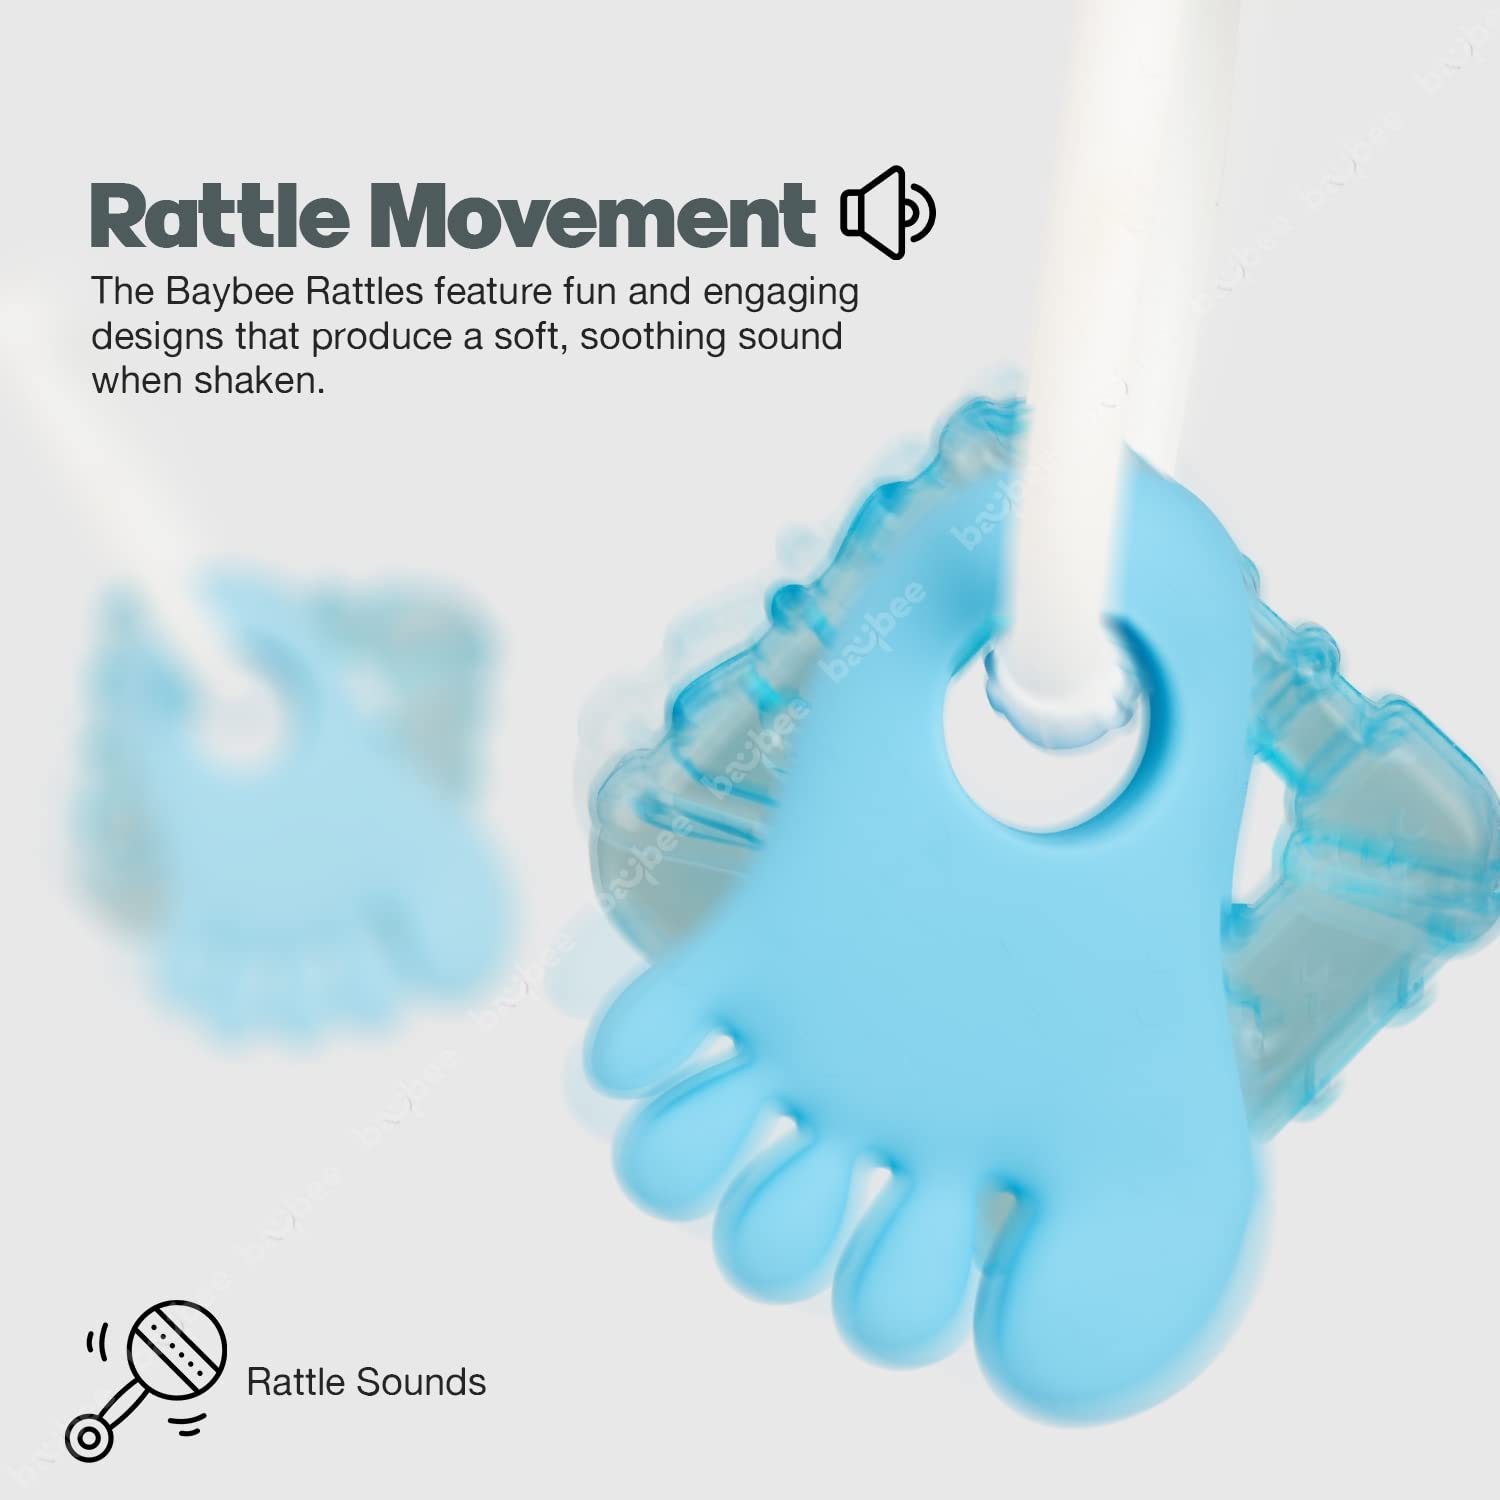 Minikin Baby Rattles & Ring Wrist Teether I Easy to Grasp and chew I BPA free with Smooth Edges